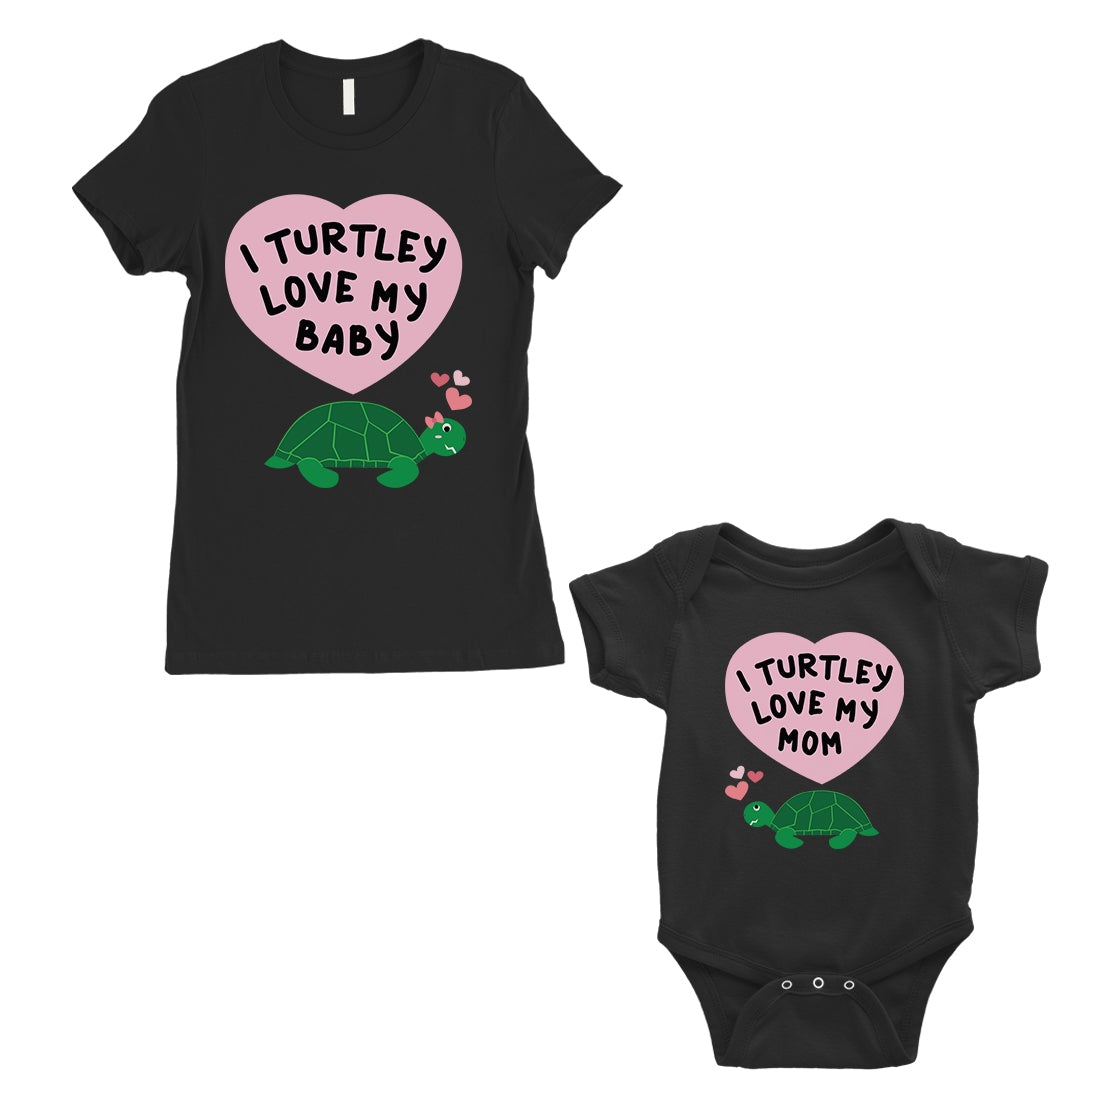 Turtley Love Baby Mom Mom and Baby Matching Gift Shirts For Moms Black